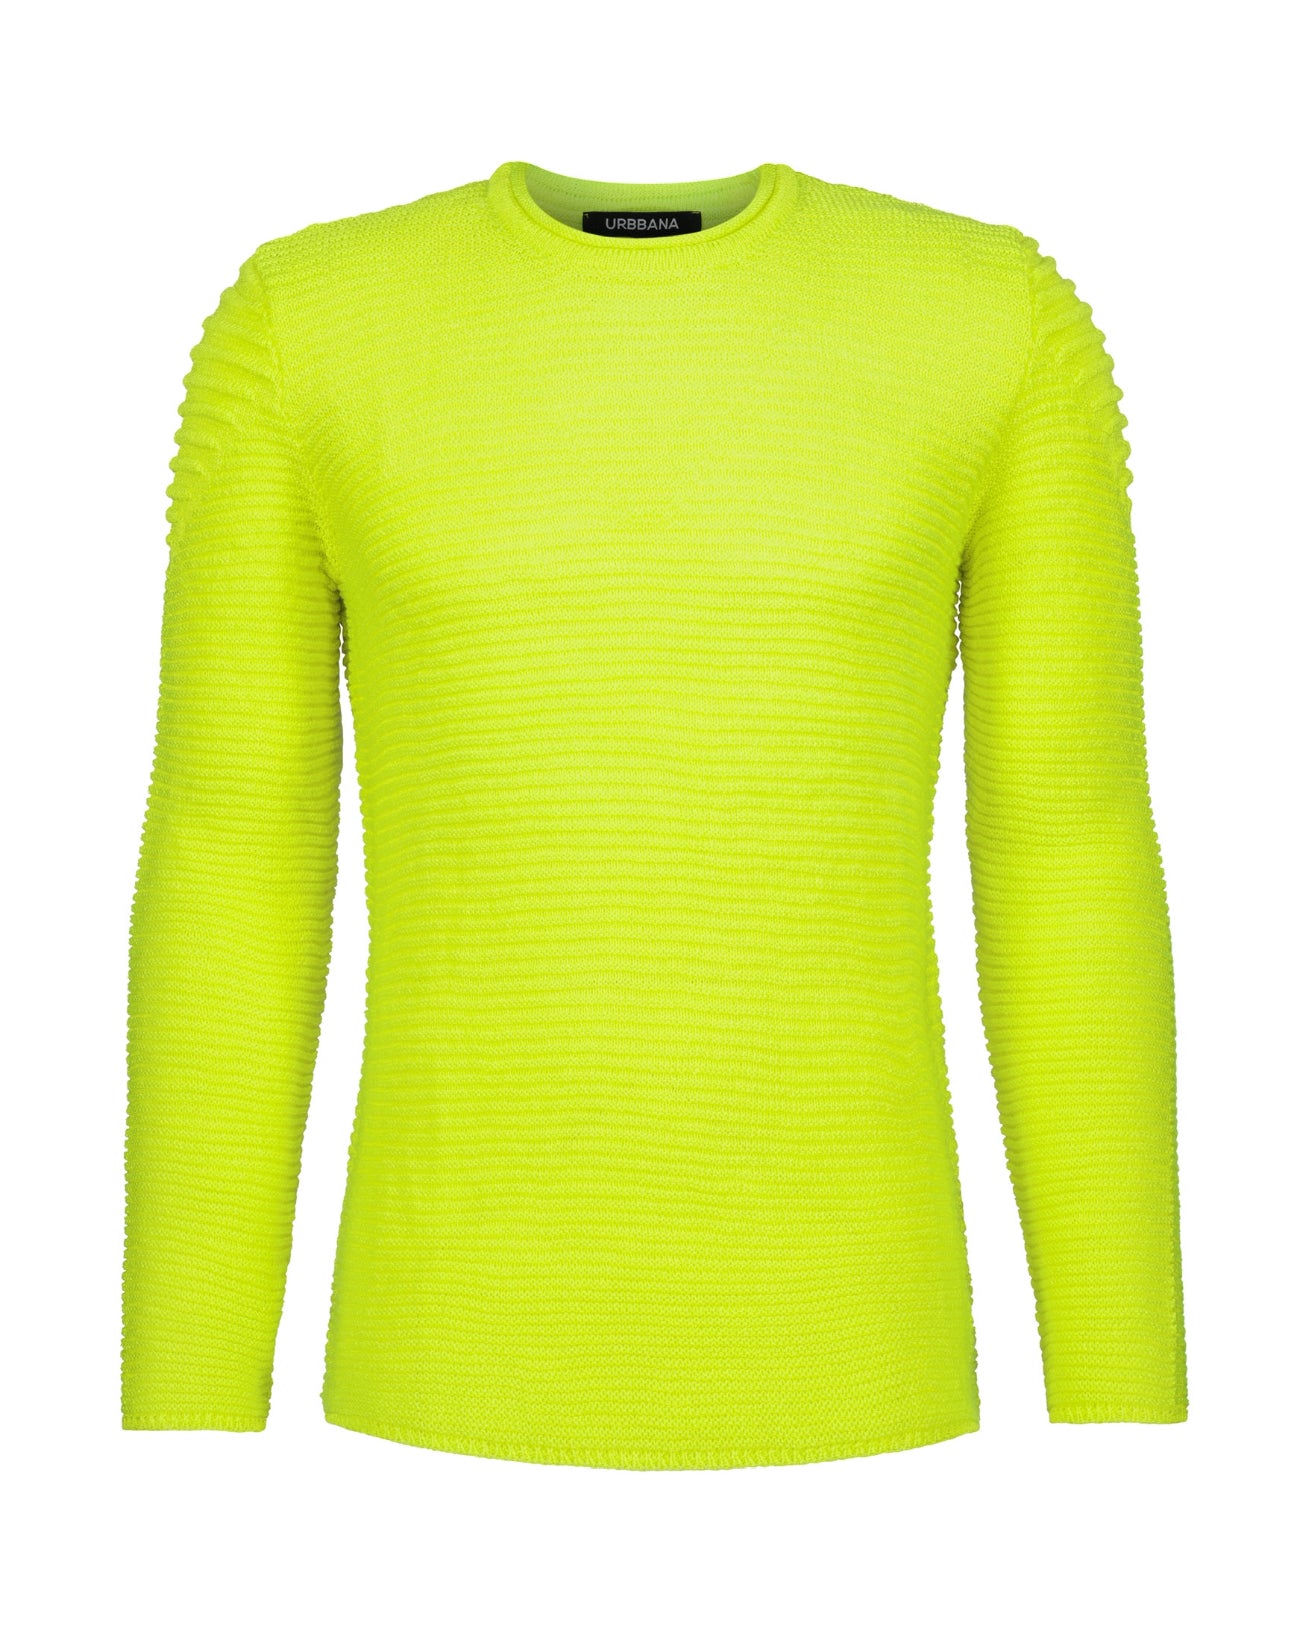 Ribbed Fluorescent Sweater - Yellow - Sweater by Urbbana